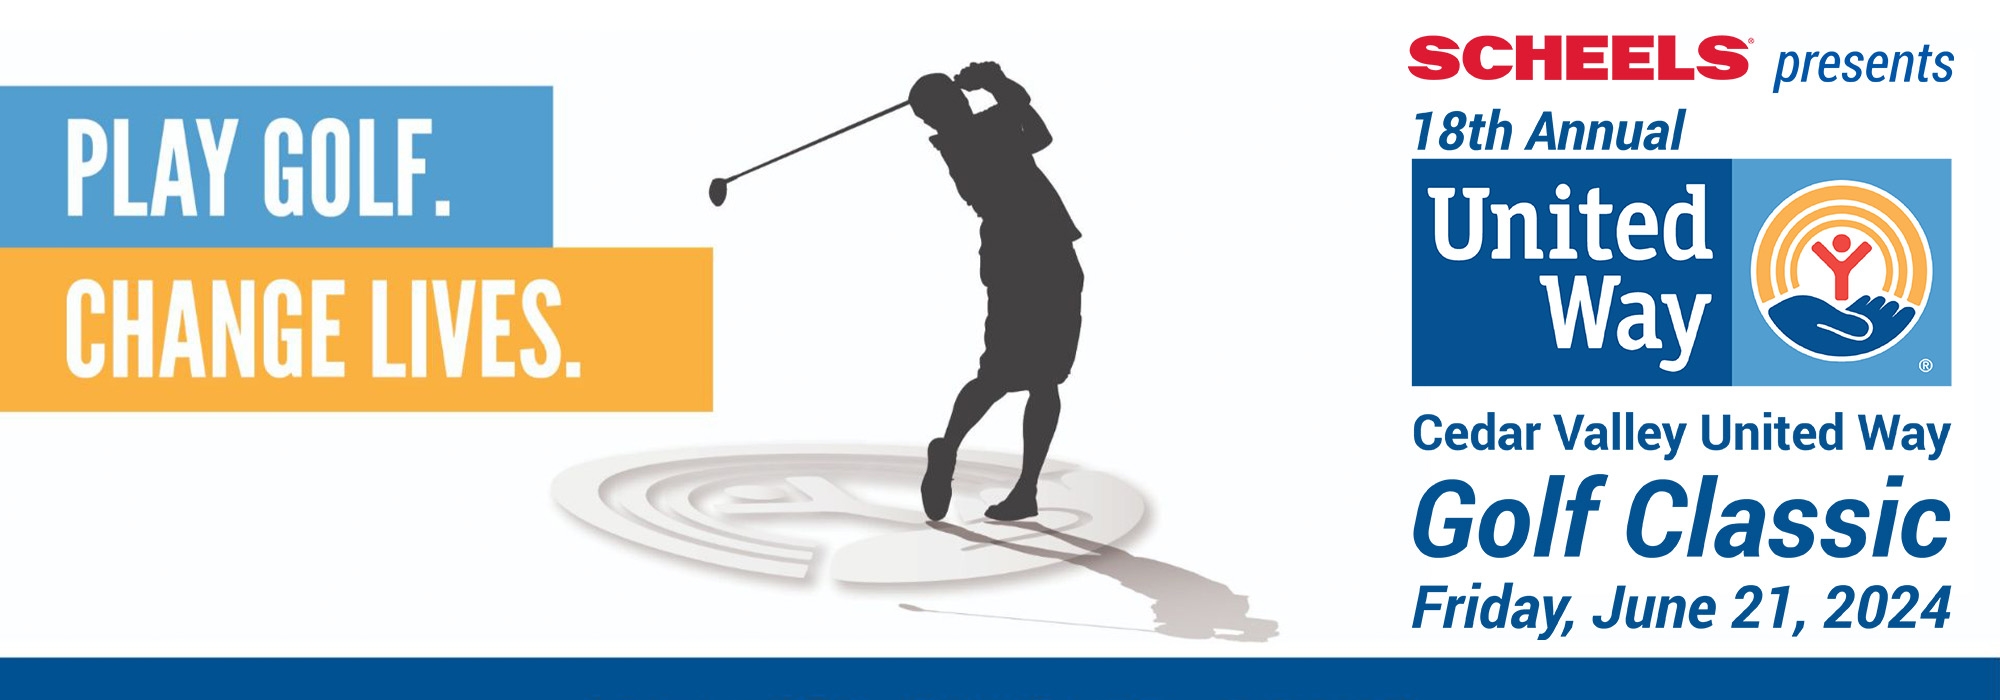 Golfer Silhouette with United Way and Scheels Logos Above Golf Classic Friday, June 21, 2024 